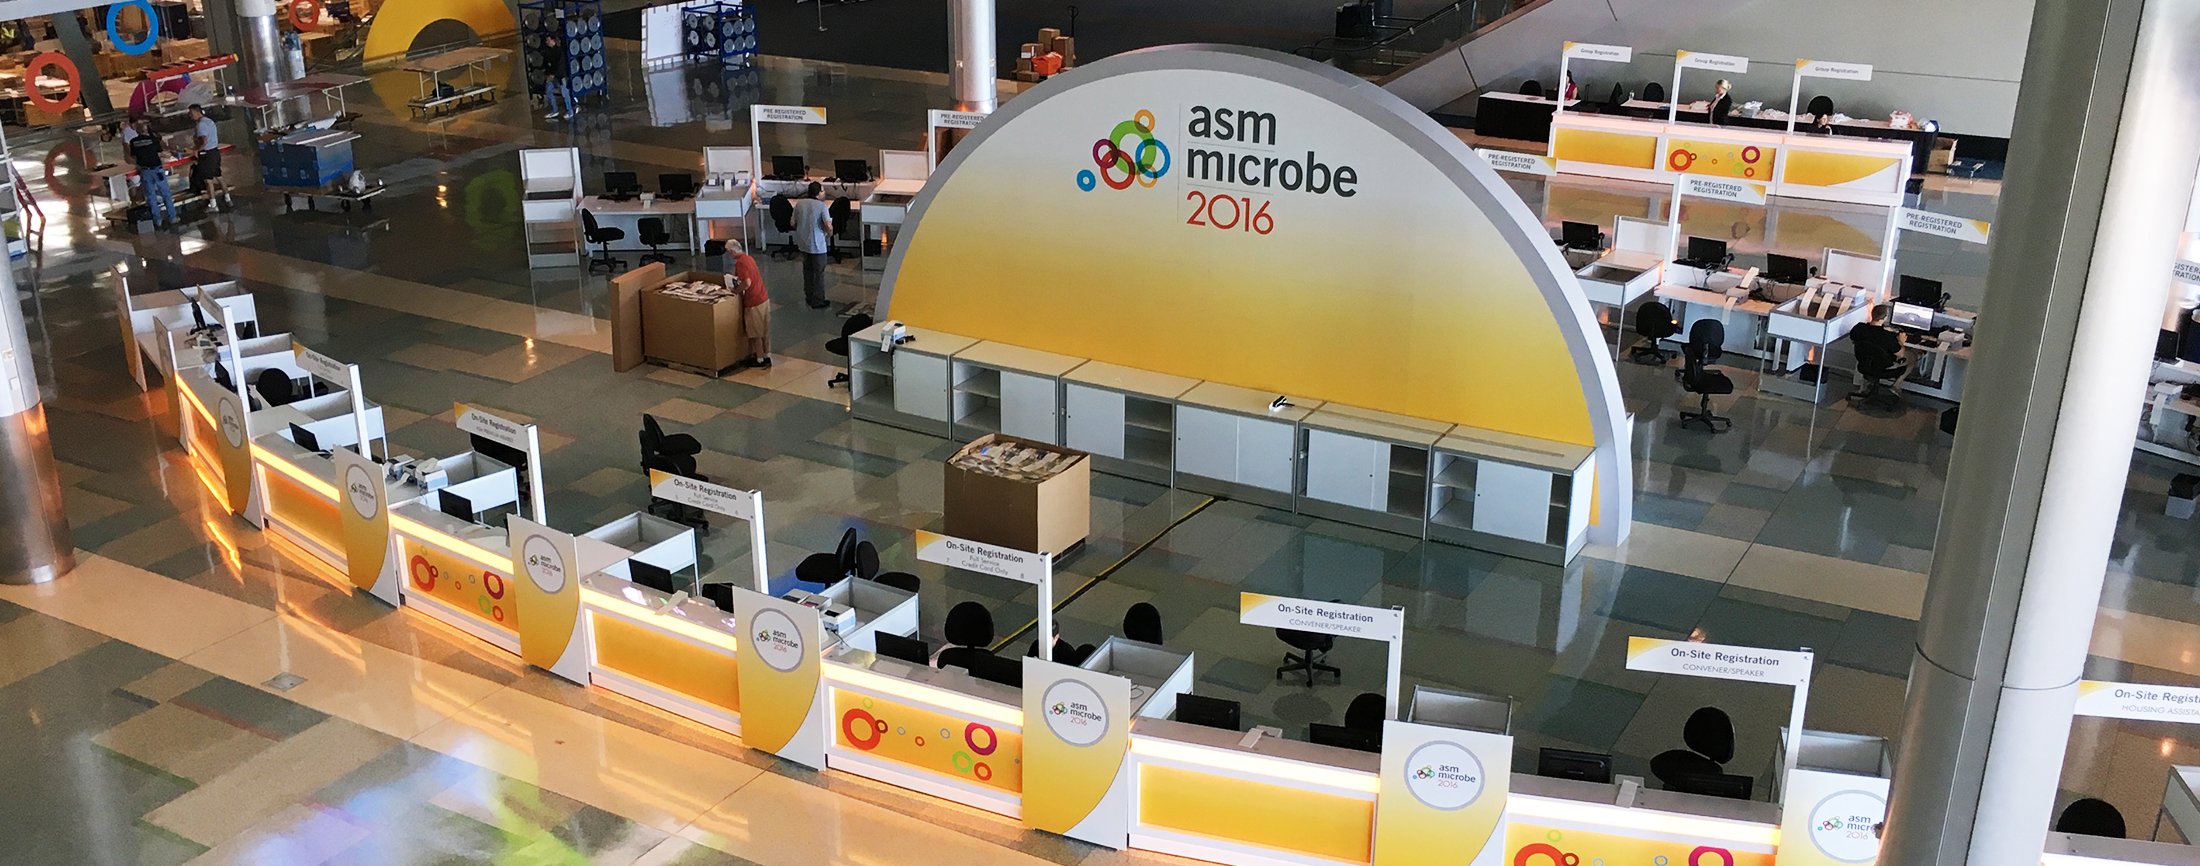 The American Society for Microbiology Launches New ASM Microbe Event in Boston